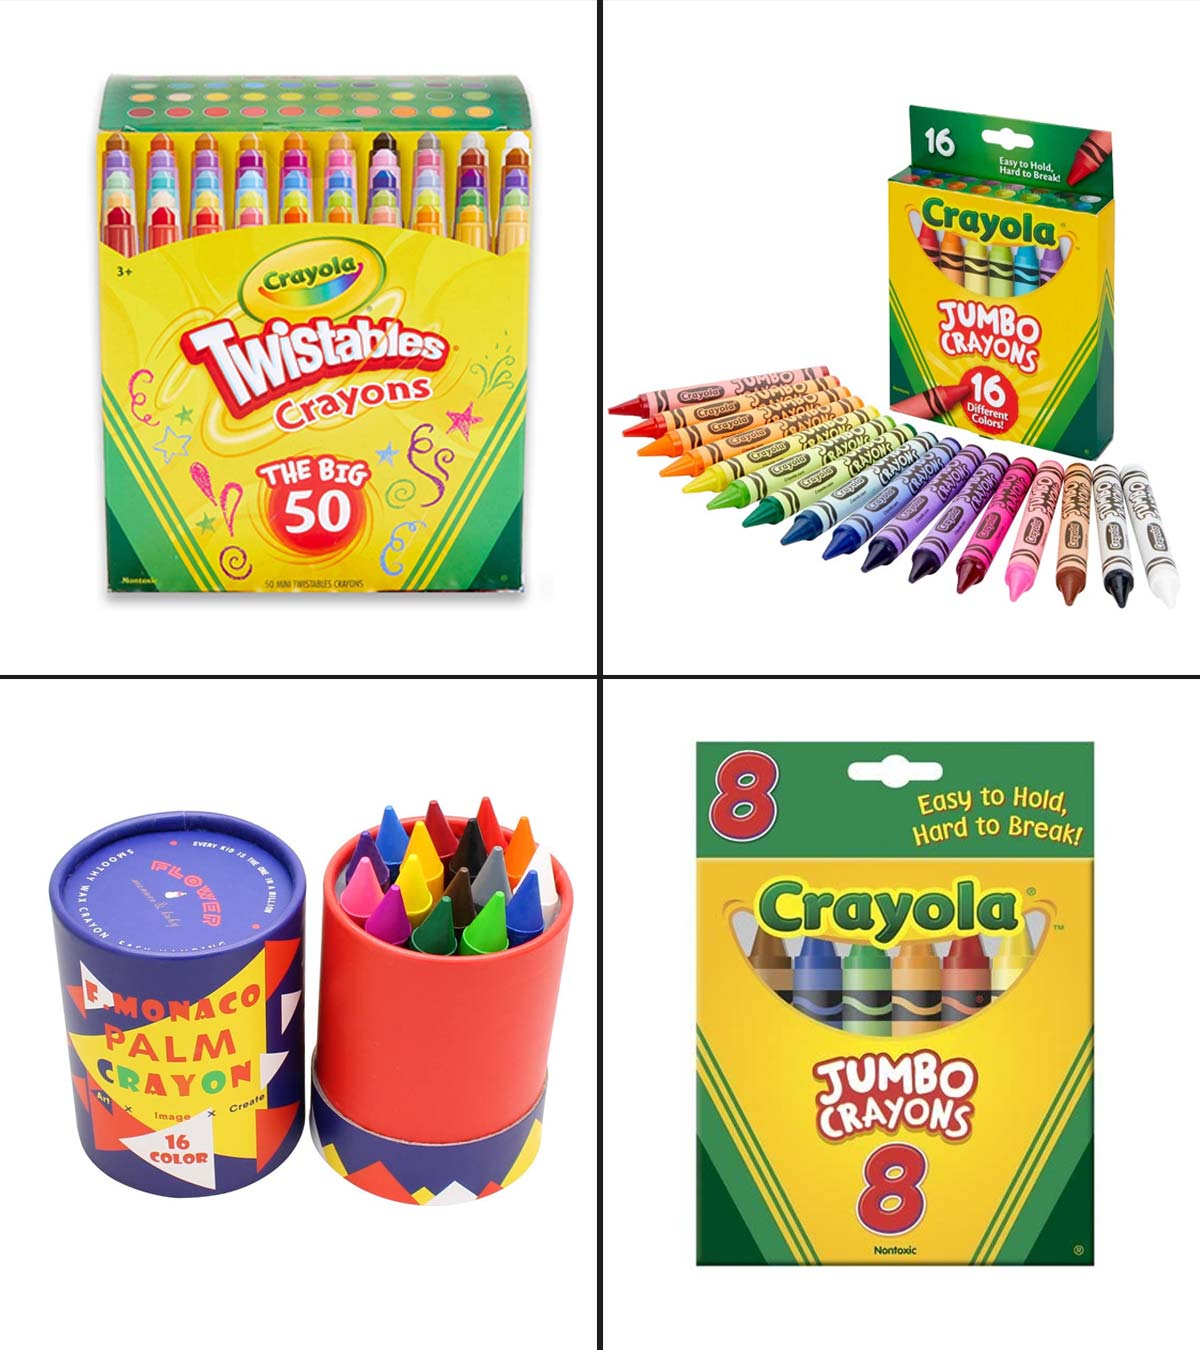 https://www.momjunction.com/wp-content/uploads/2020/04/15-Best-Crayons-For-Toddlers.jpg